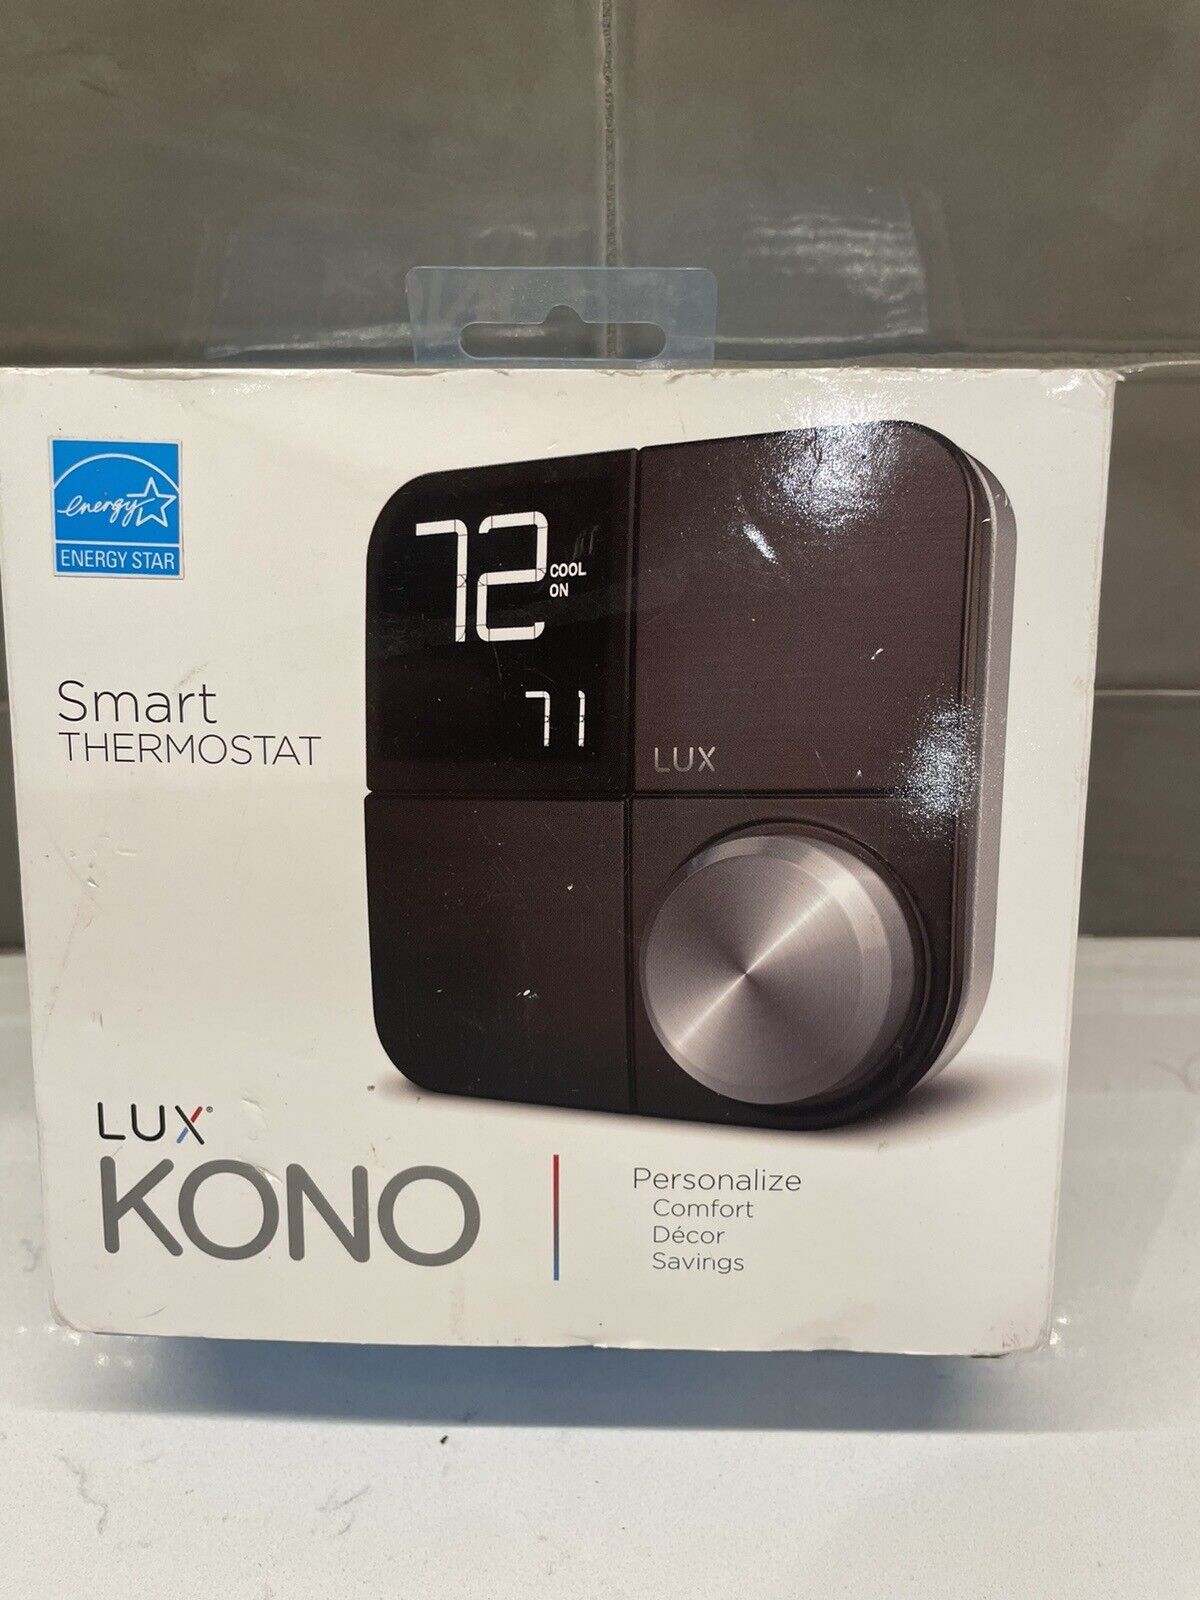 LUX KONO SMART THERMOSTAT   KN S MG1 B04 - New Wow Fast Shipping